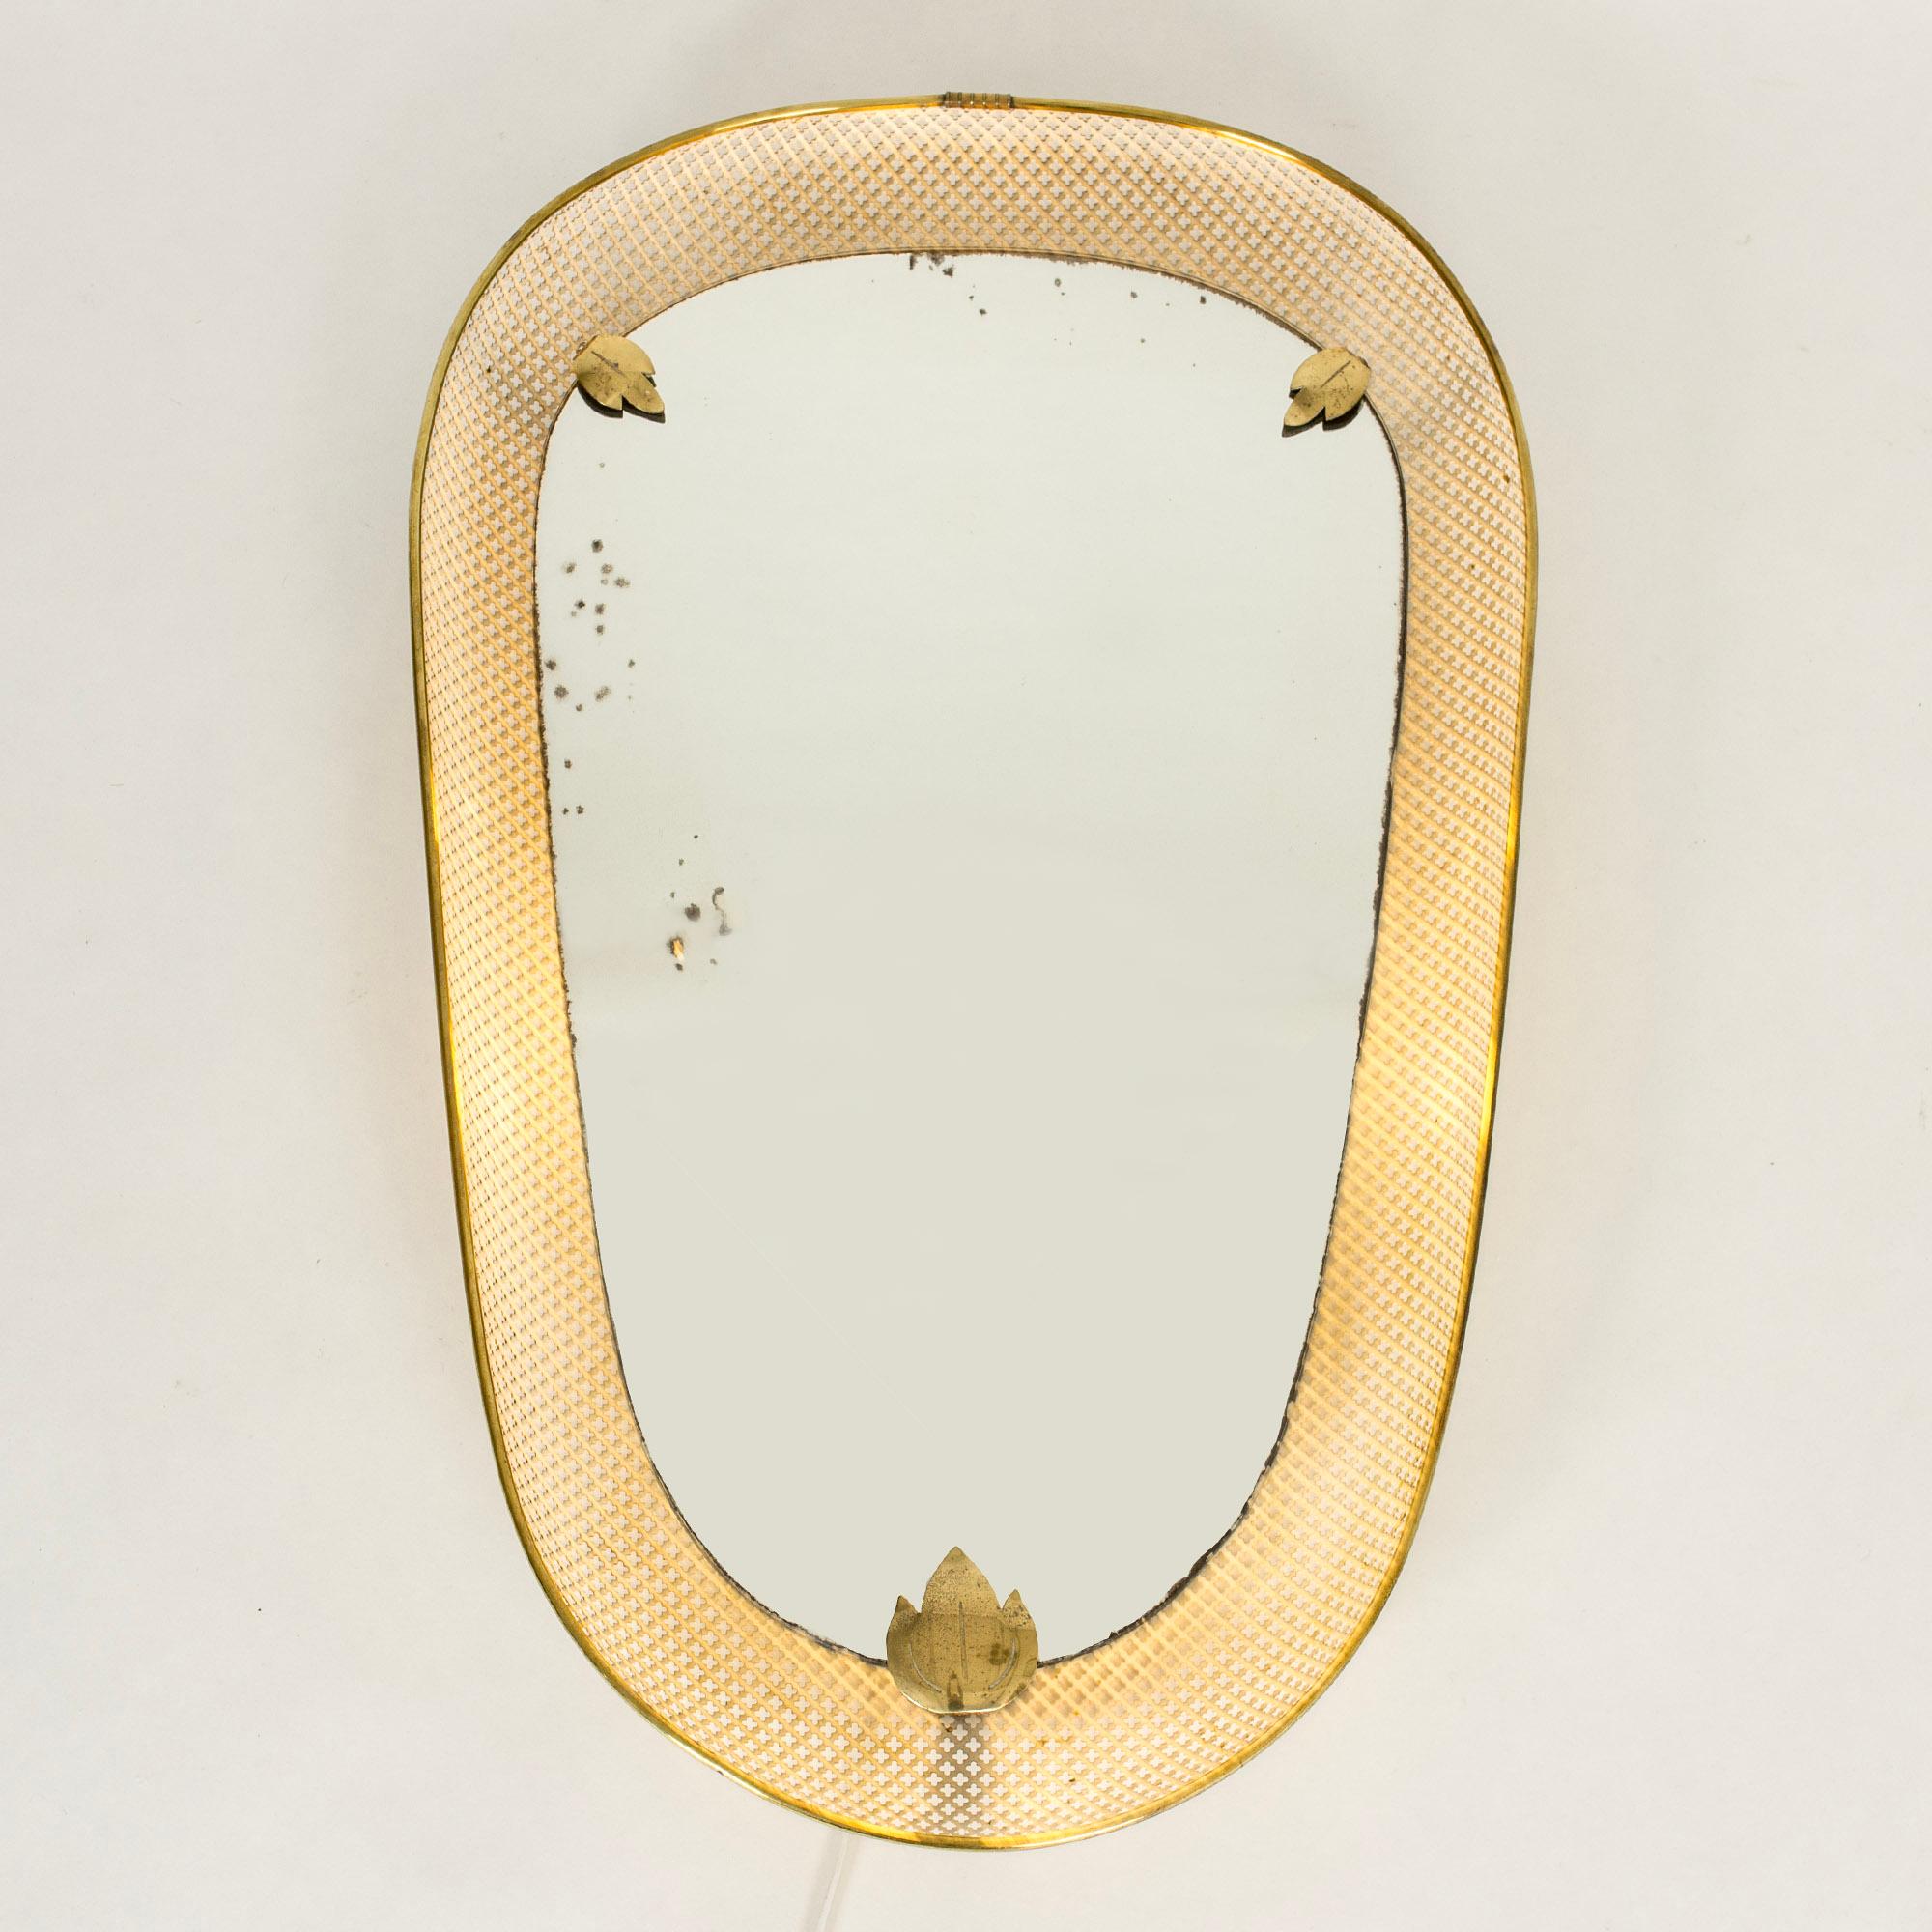 Elegant Swedish Modern wall mirror, lit from behind so that light glows around the edge of the mirror glass. Made from white lacquered metal with cutout clover pattern, brass rim and decorative leaves. Original glass with some small losses.